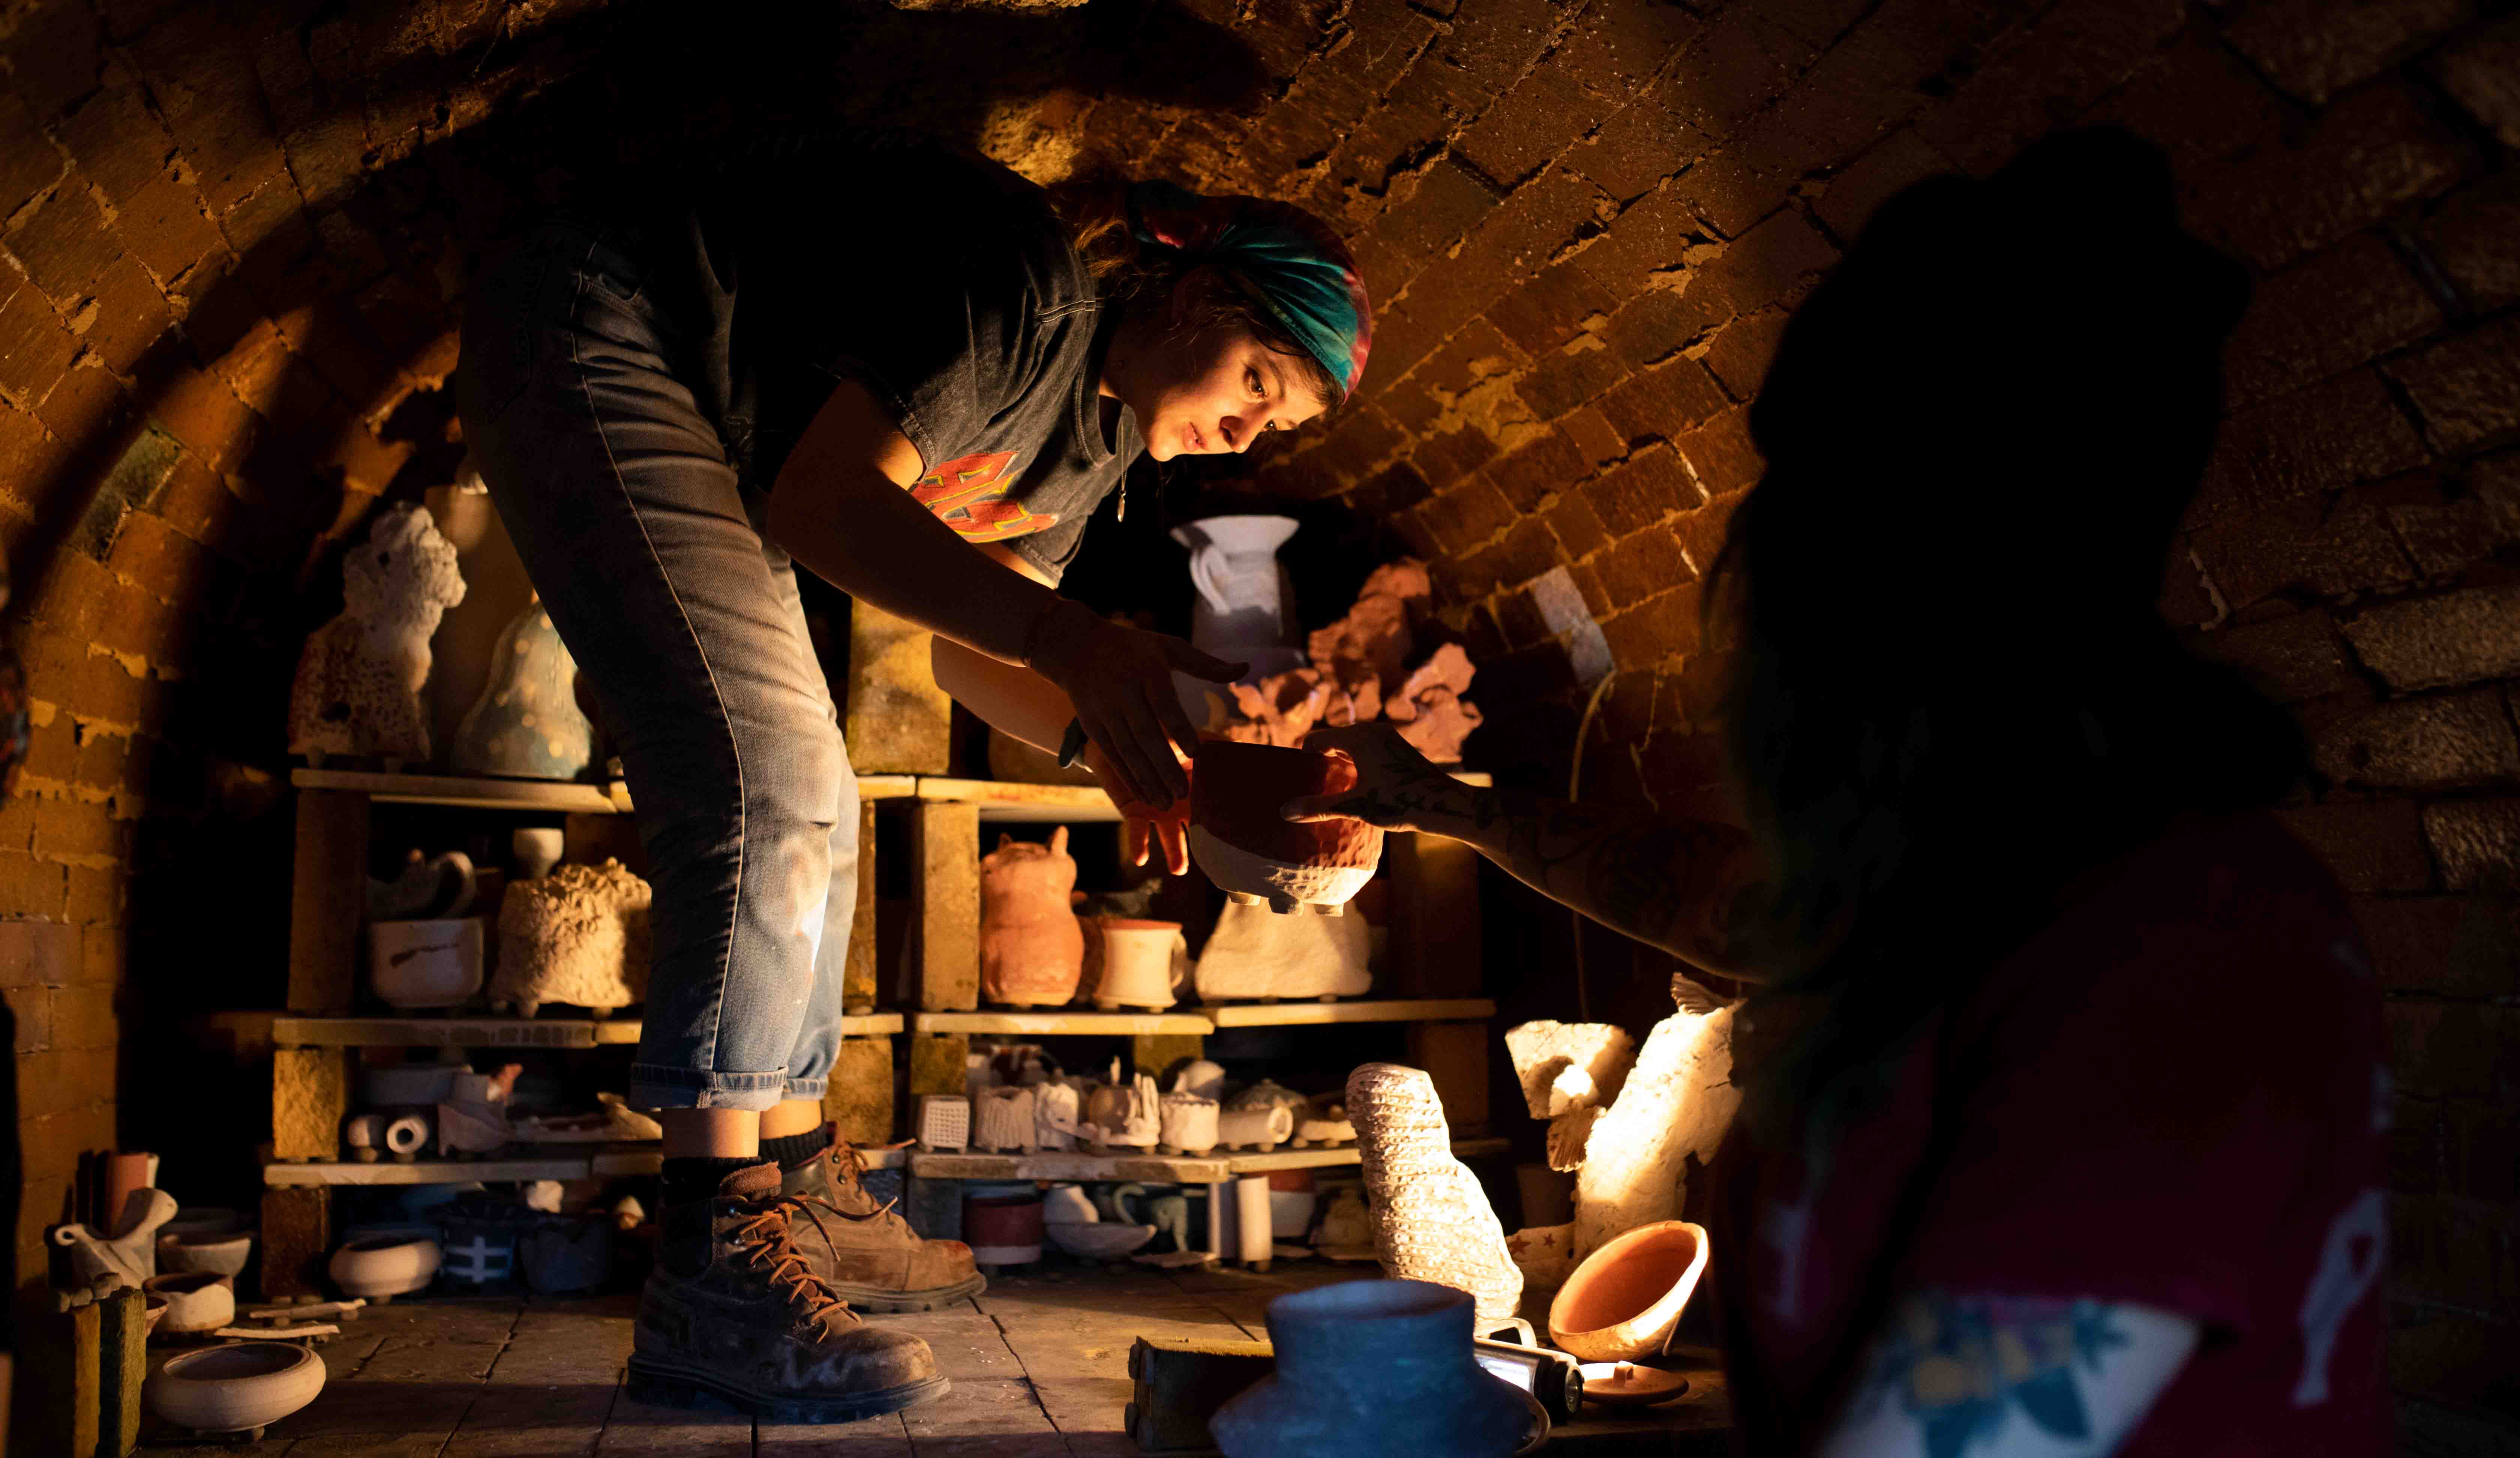 Students load the Anagama Kiln outside the Visual Arts Building